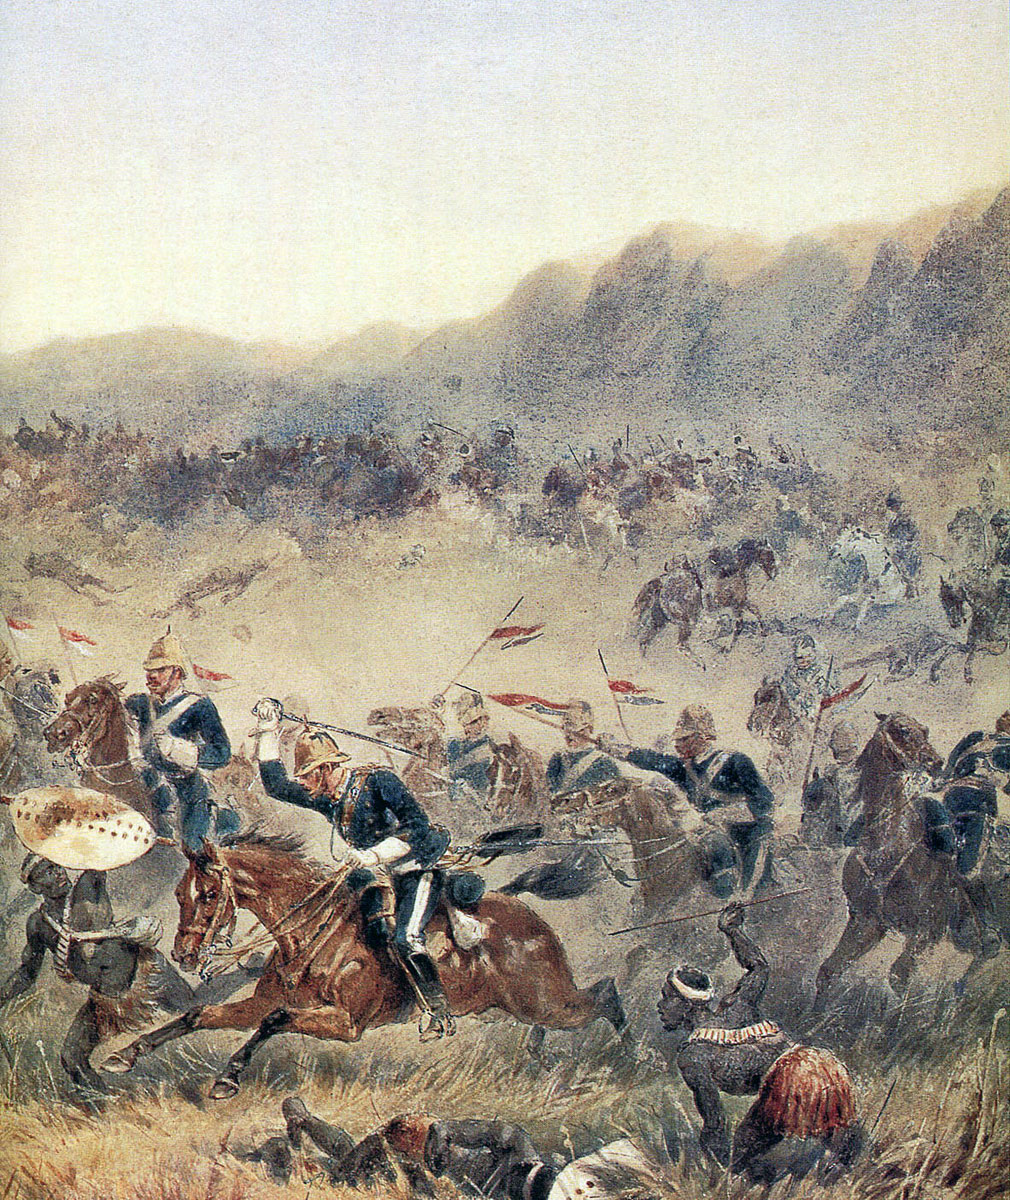 Charge of the 17th Lancers at the Battle of Ulundi on 4th July 1879 in the Zulu War: picture by Orlando Norie